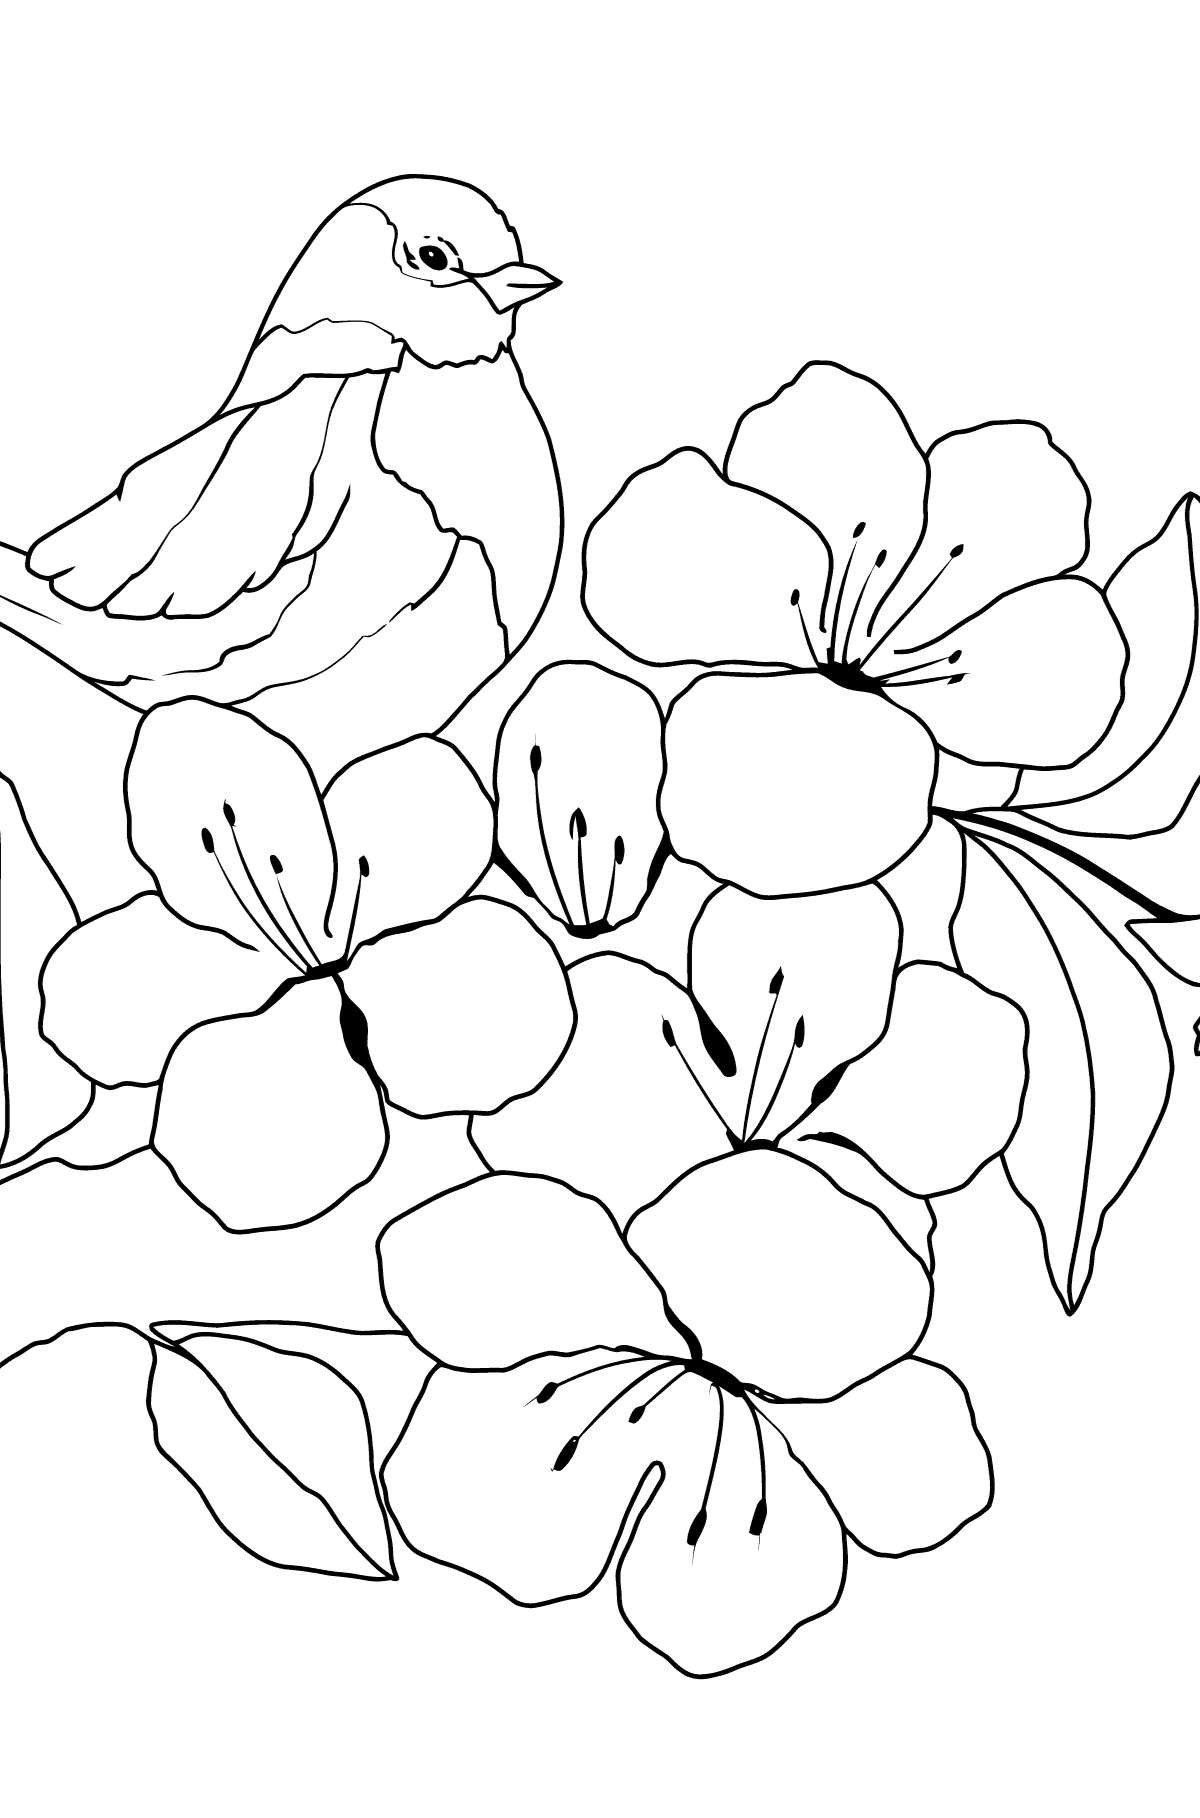 Bird coloring page for kids - Coloring Pages for Kids